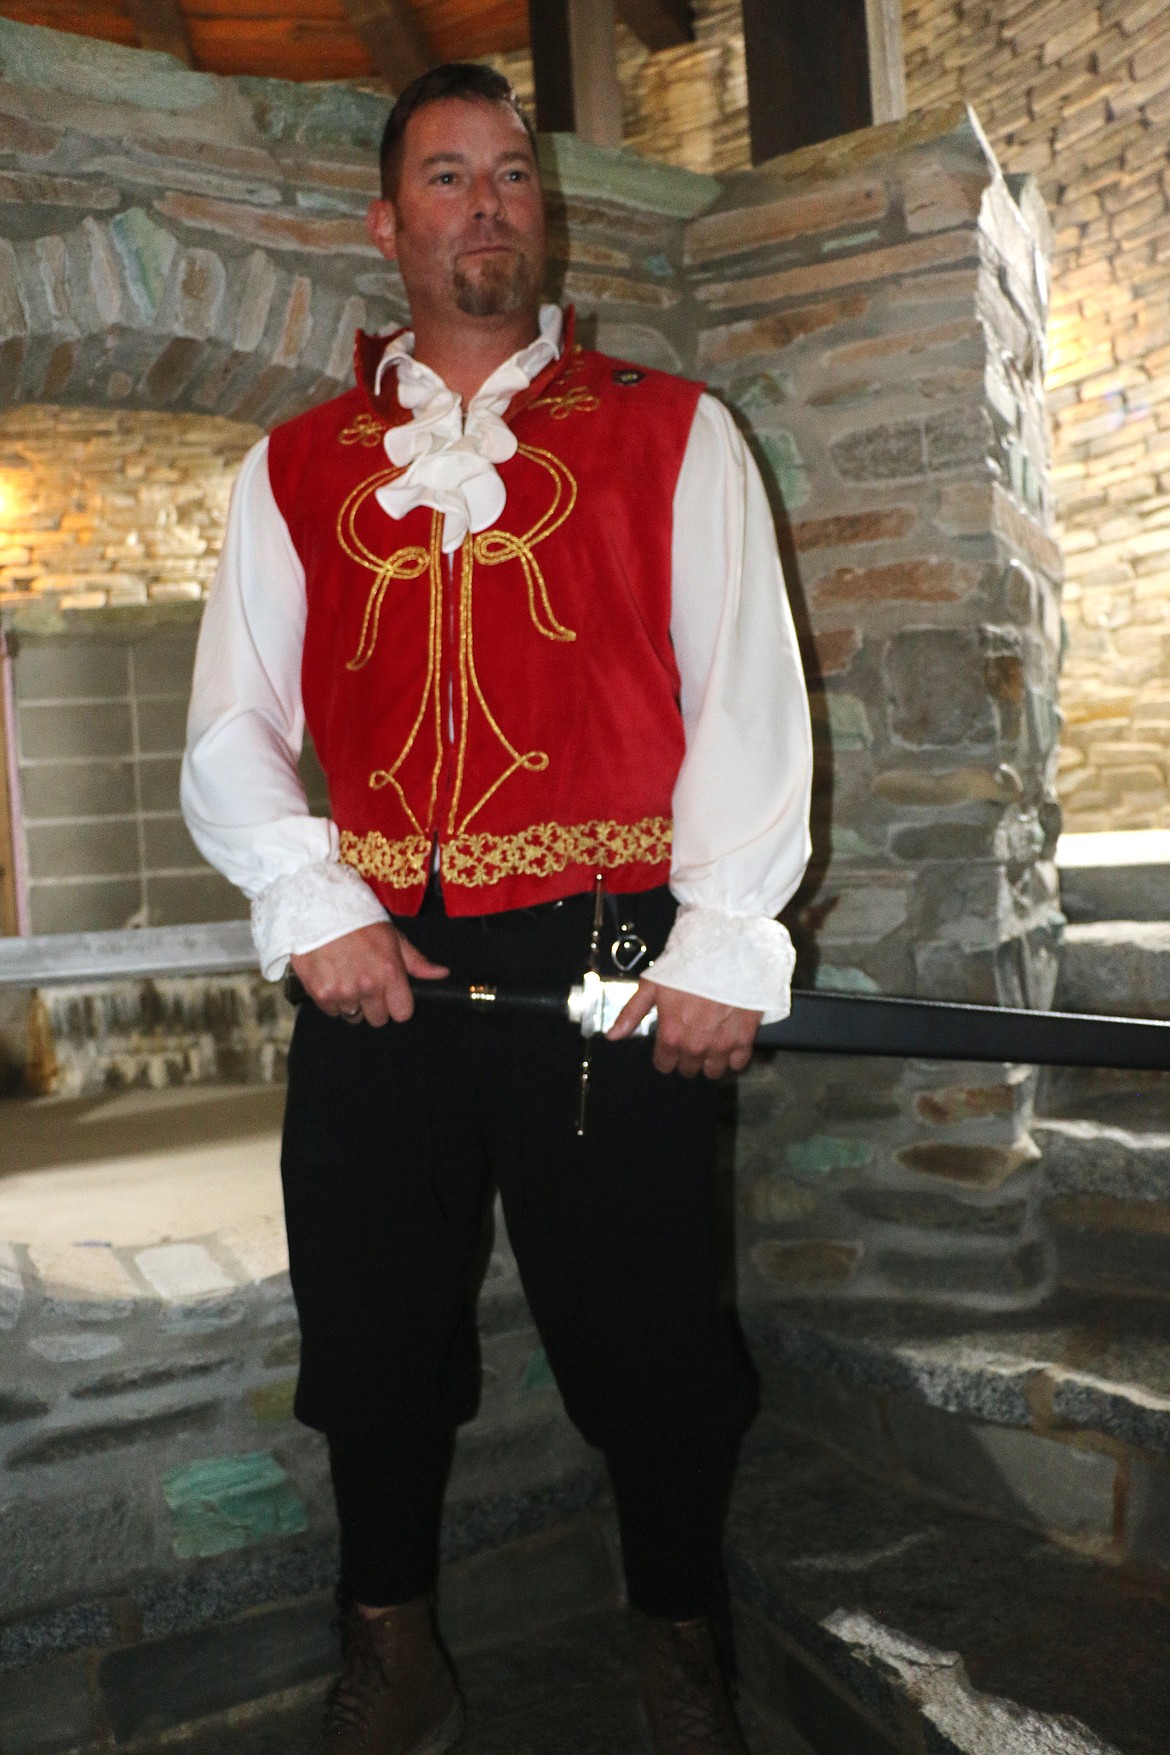 A member of the Sandpoint Renaissance Faire welcomes guests to a gala event at the castle.